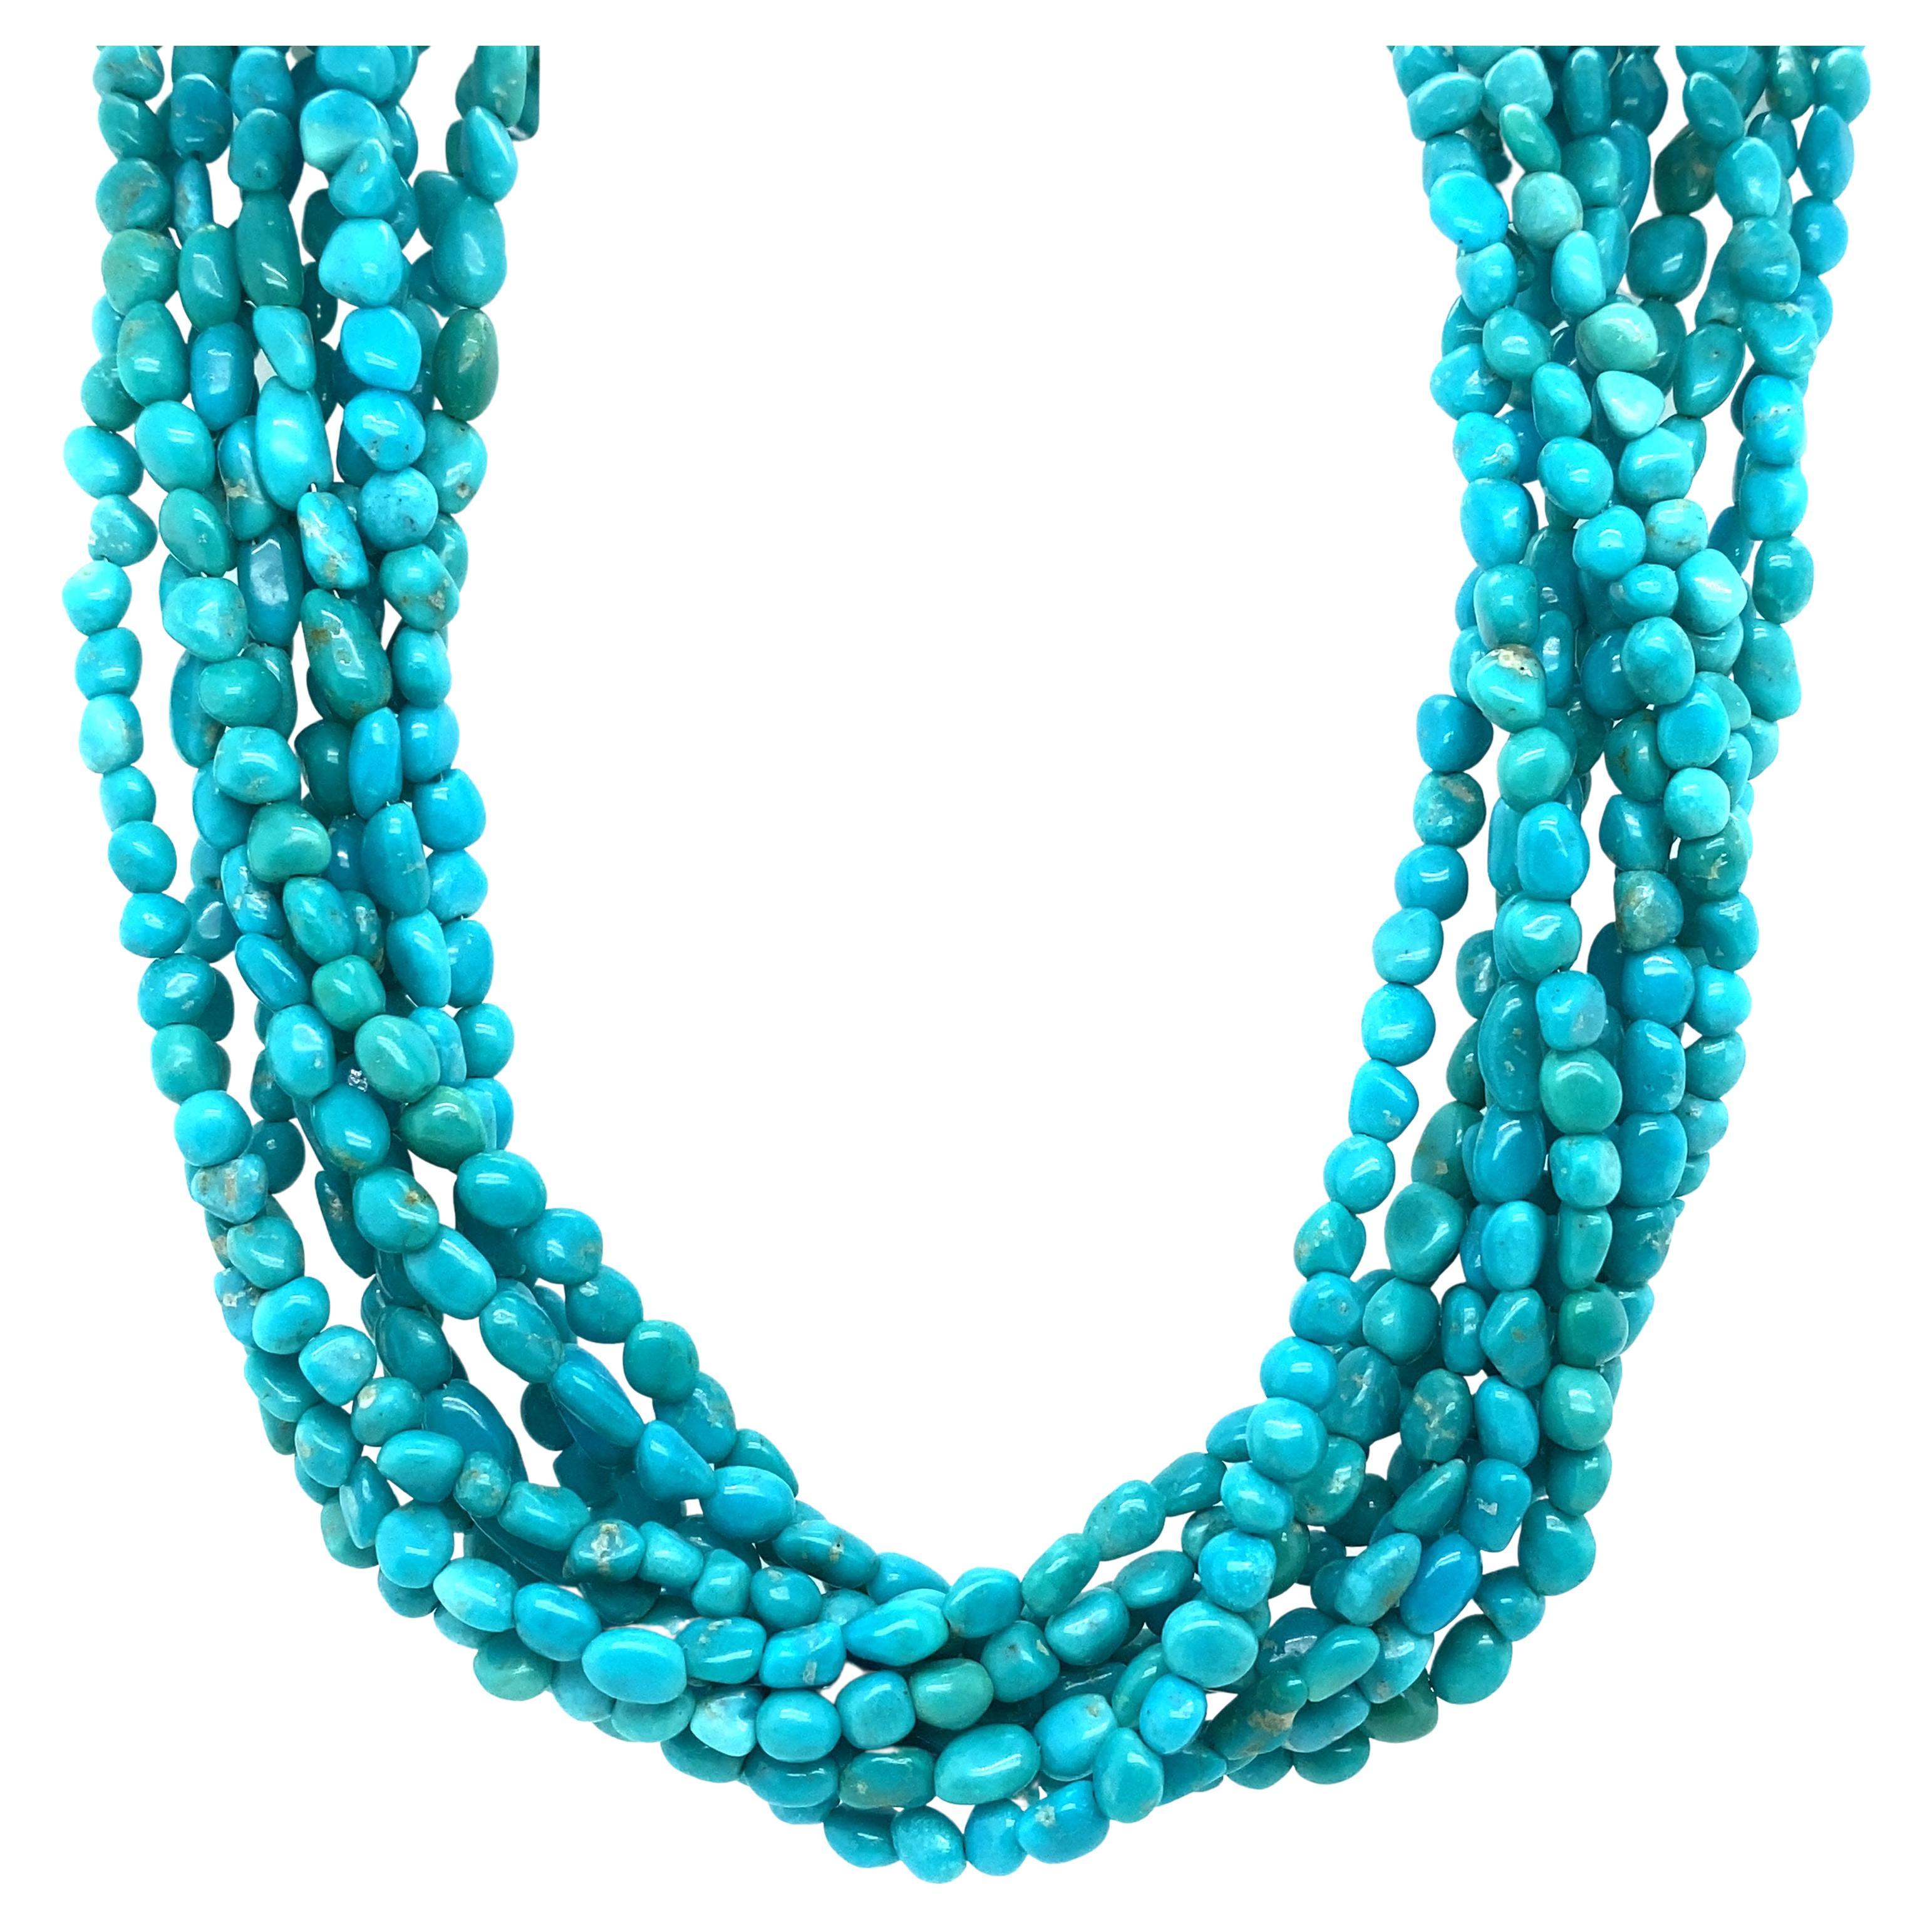 Southwestern Multi Strand Turquoise Necklace in Sterling Silver